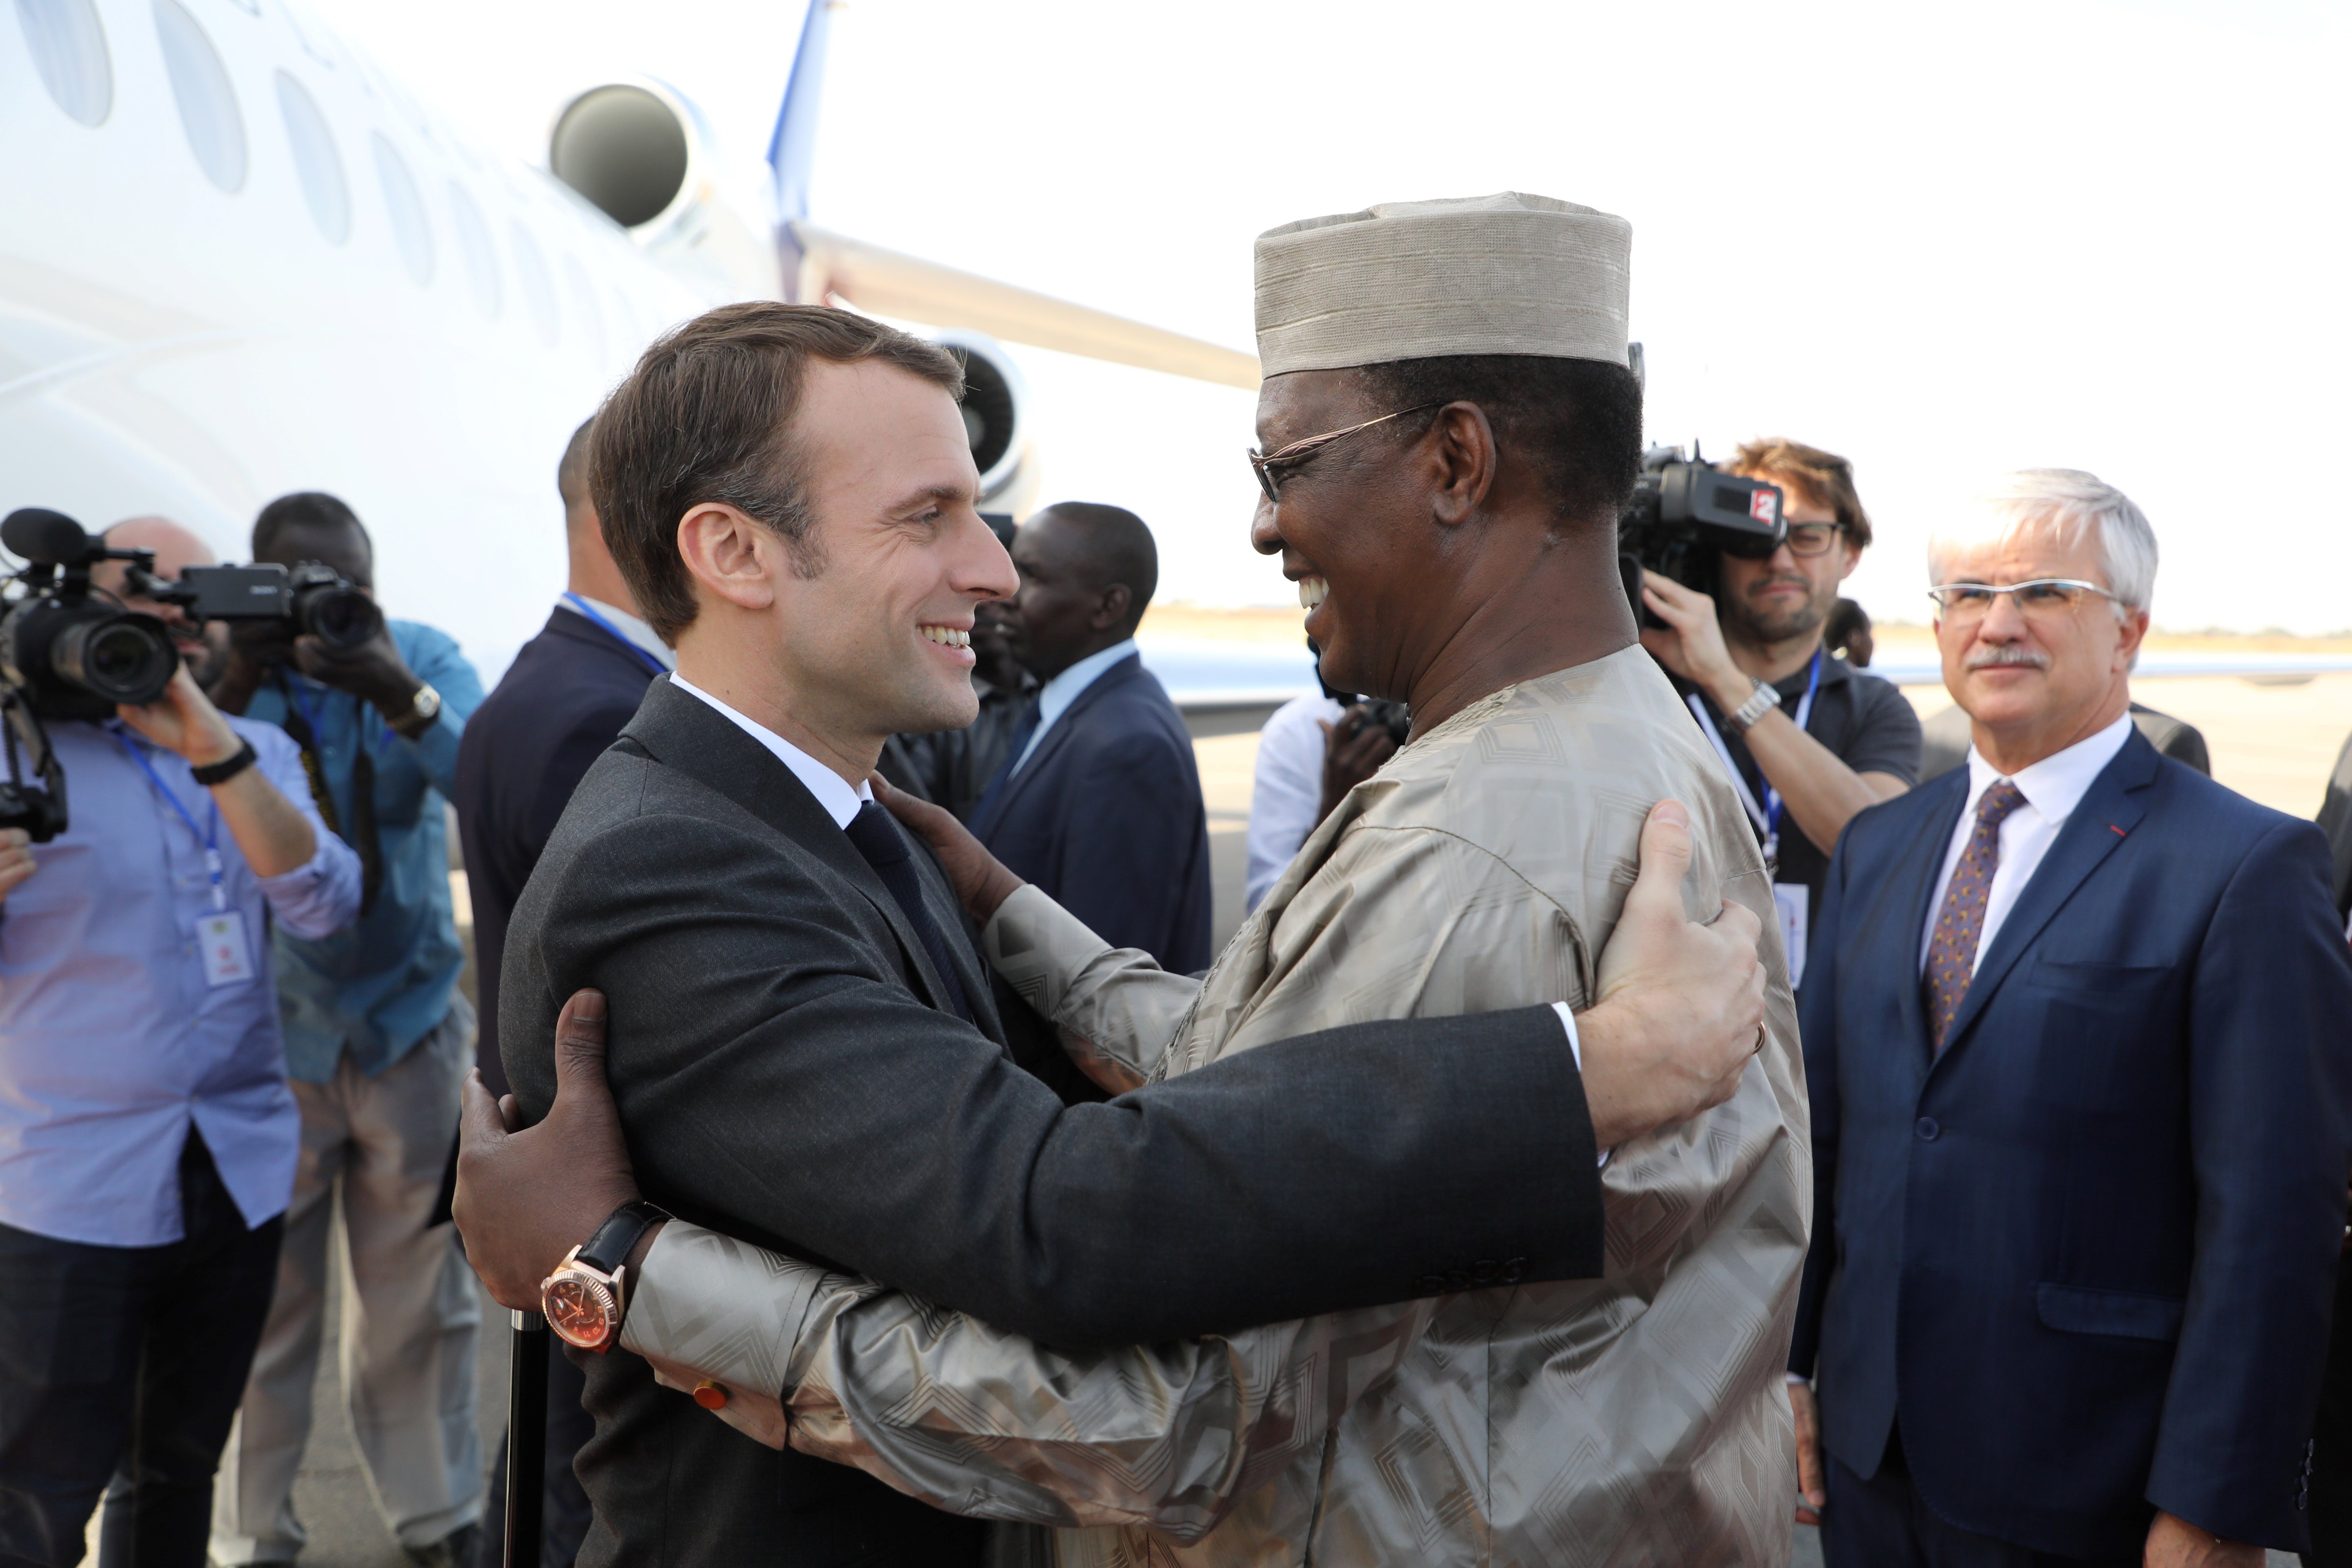 France's president Emmanuel Macron (L) is welcomed by Chad's president Idriss Deby upon his arrival at the international airport of N'Djamena on December 22, 2018. (Ludovic Marin—AFP/Getty Images)